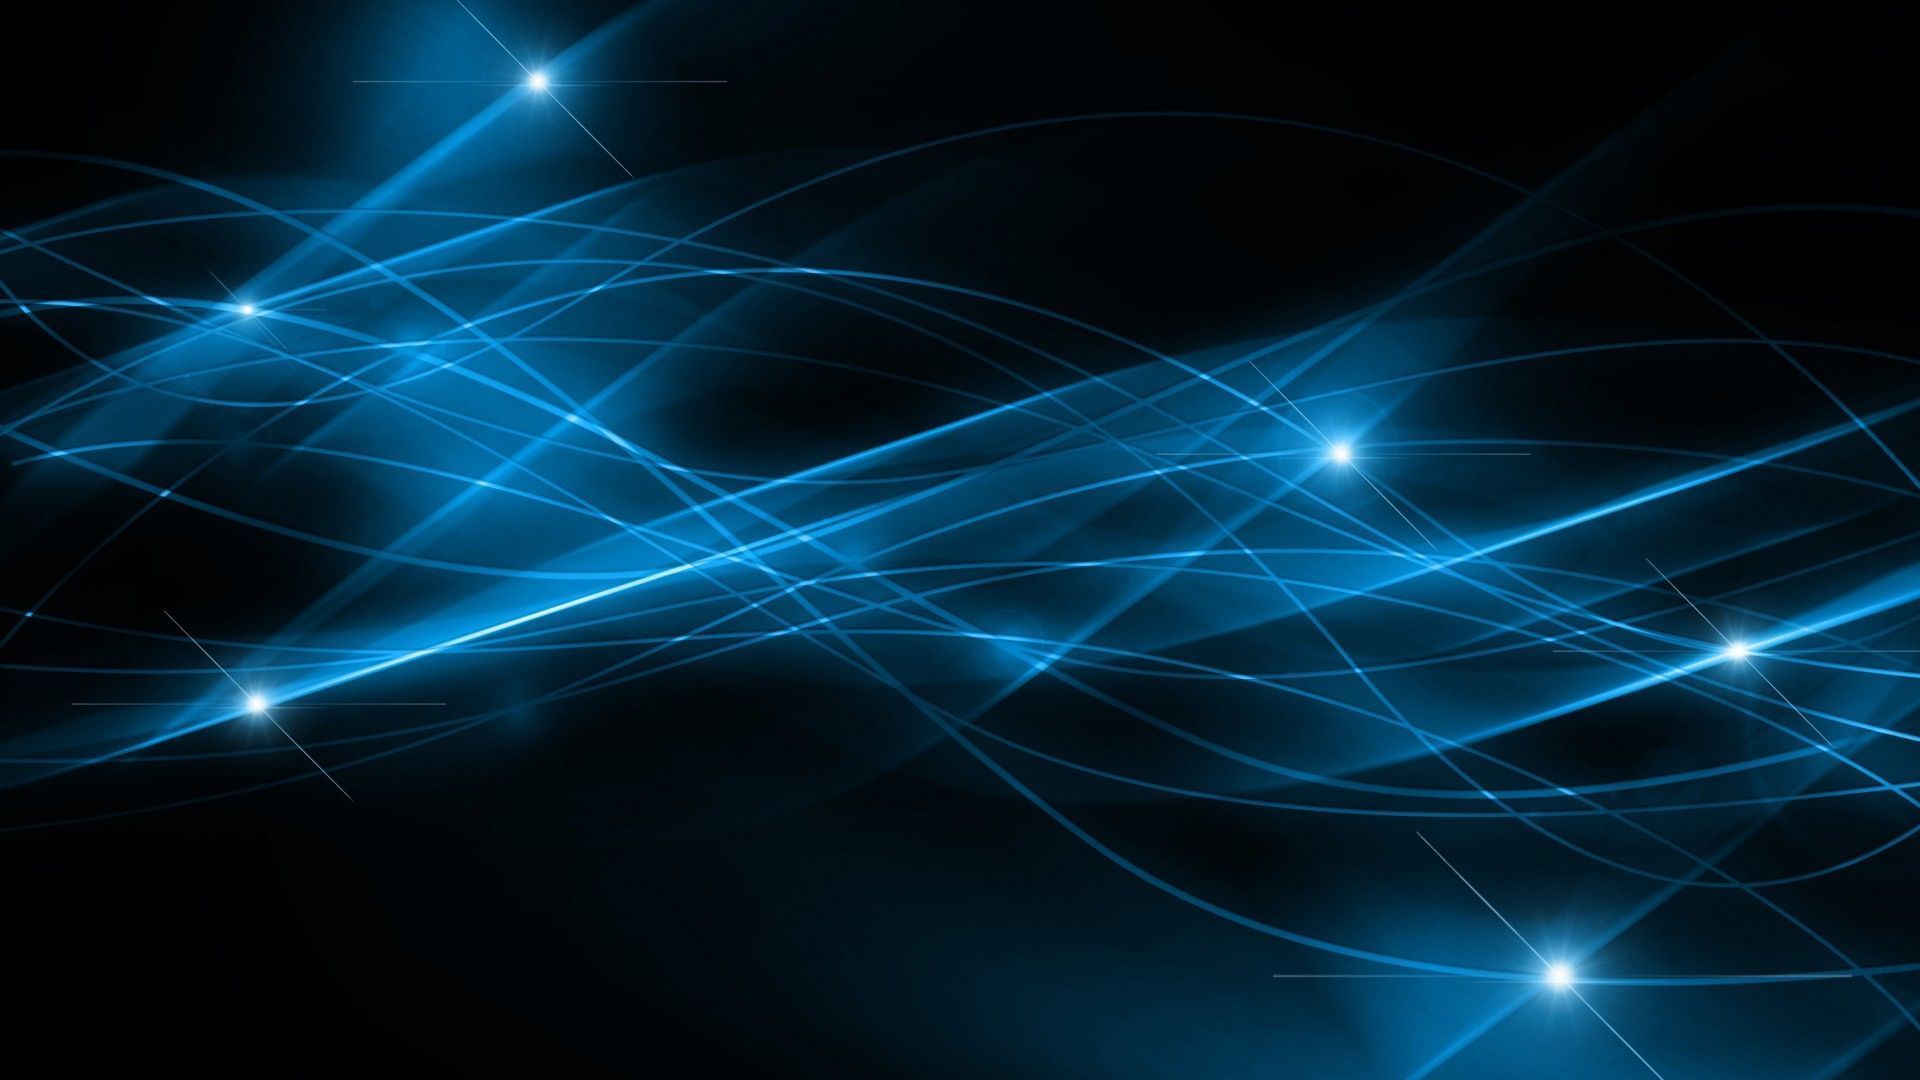 Black and Blue Abstract Wallpaper Free Black and Blue